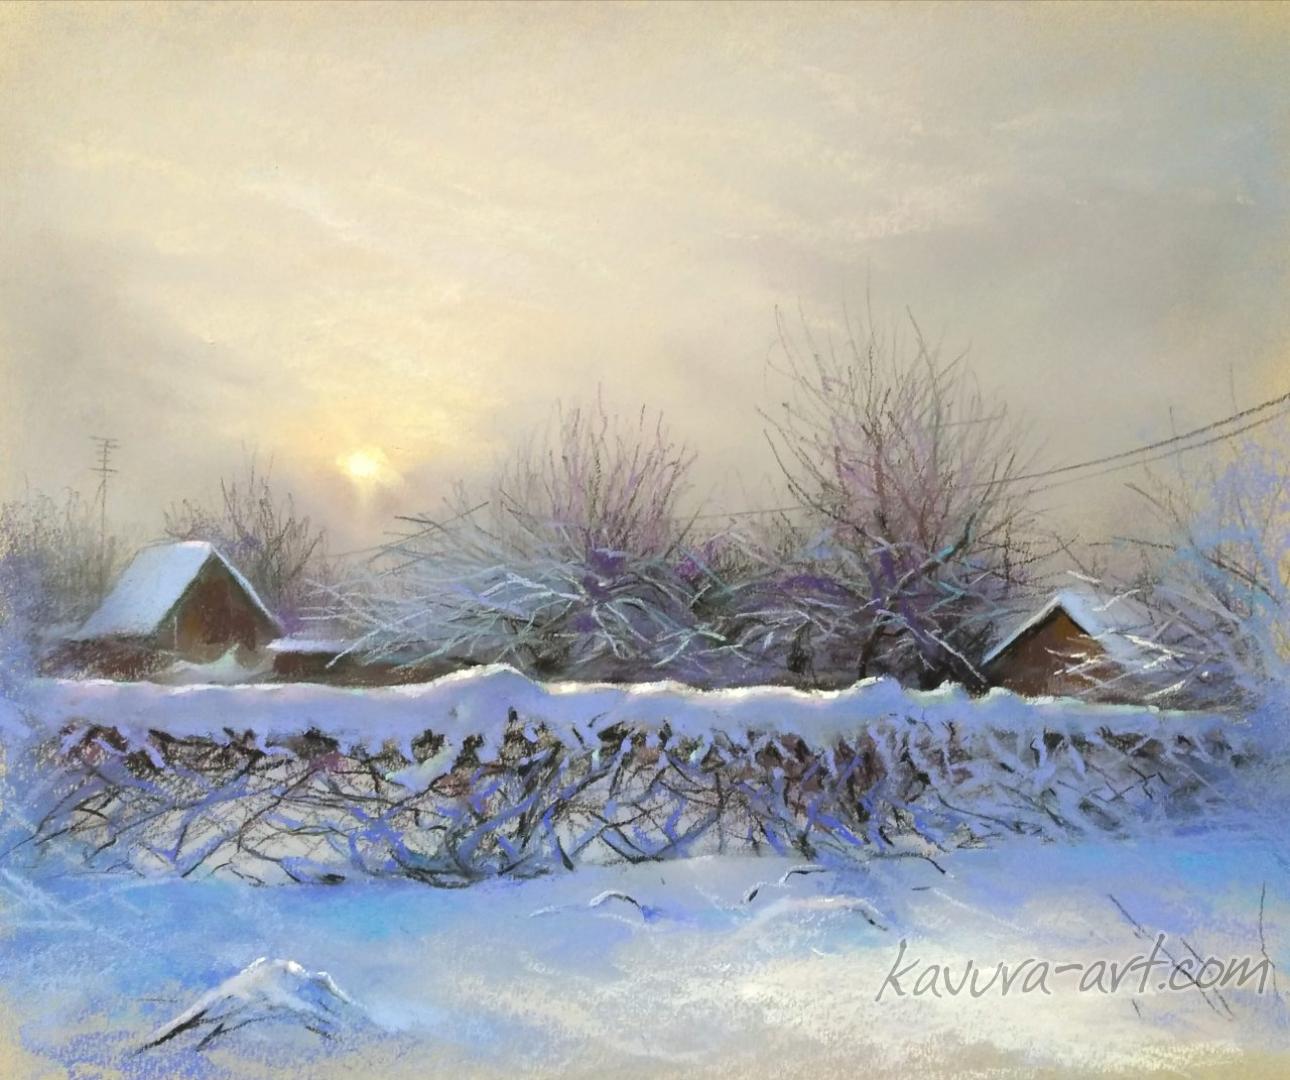 "Winter day" Pastel on paper.